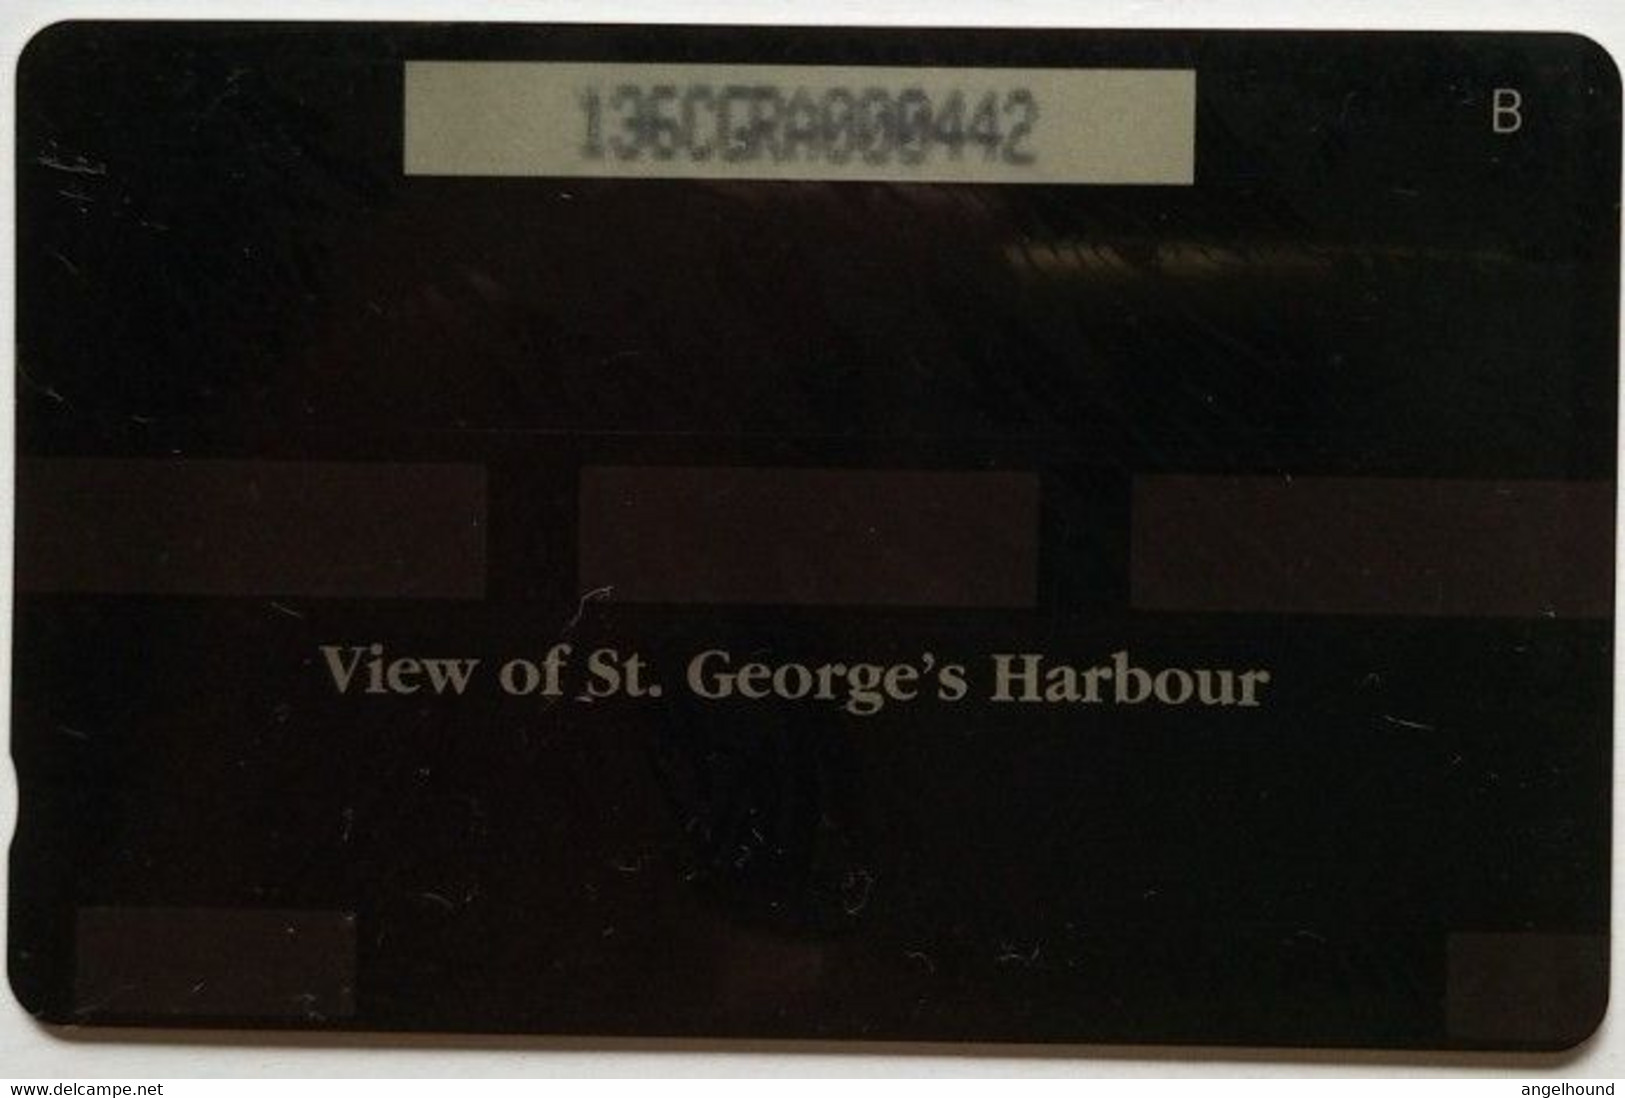 Grenada Cable And Wireless US$10 136CGRA " View Of St. George Harbour" - Grenada